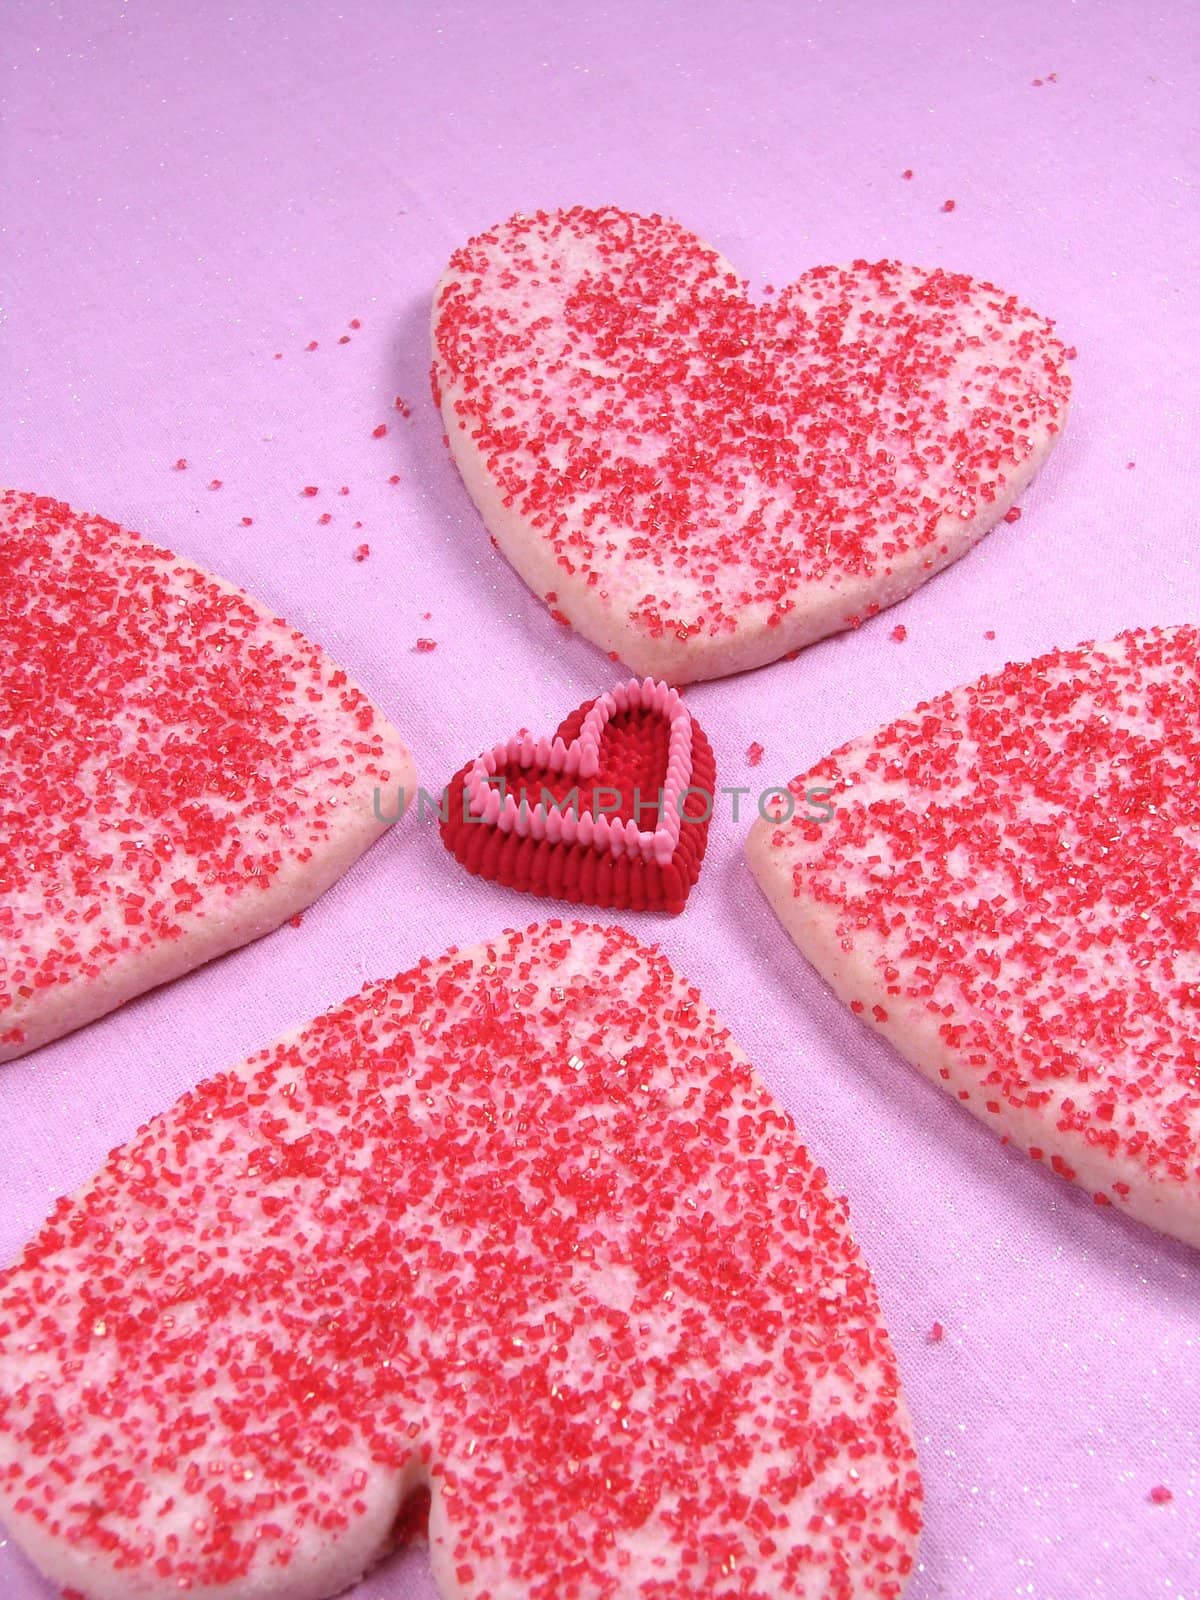 Simple heart sugar cookies sprinkled with red sugar. Cookies are placed on pink cloth.